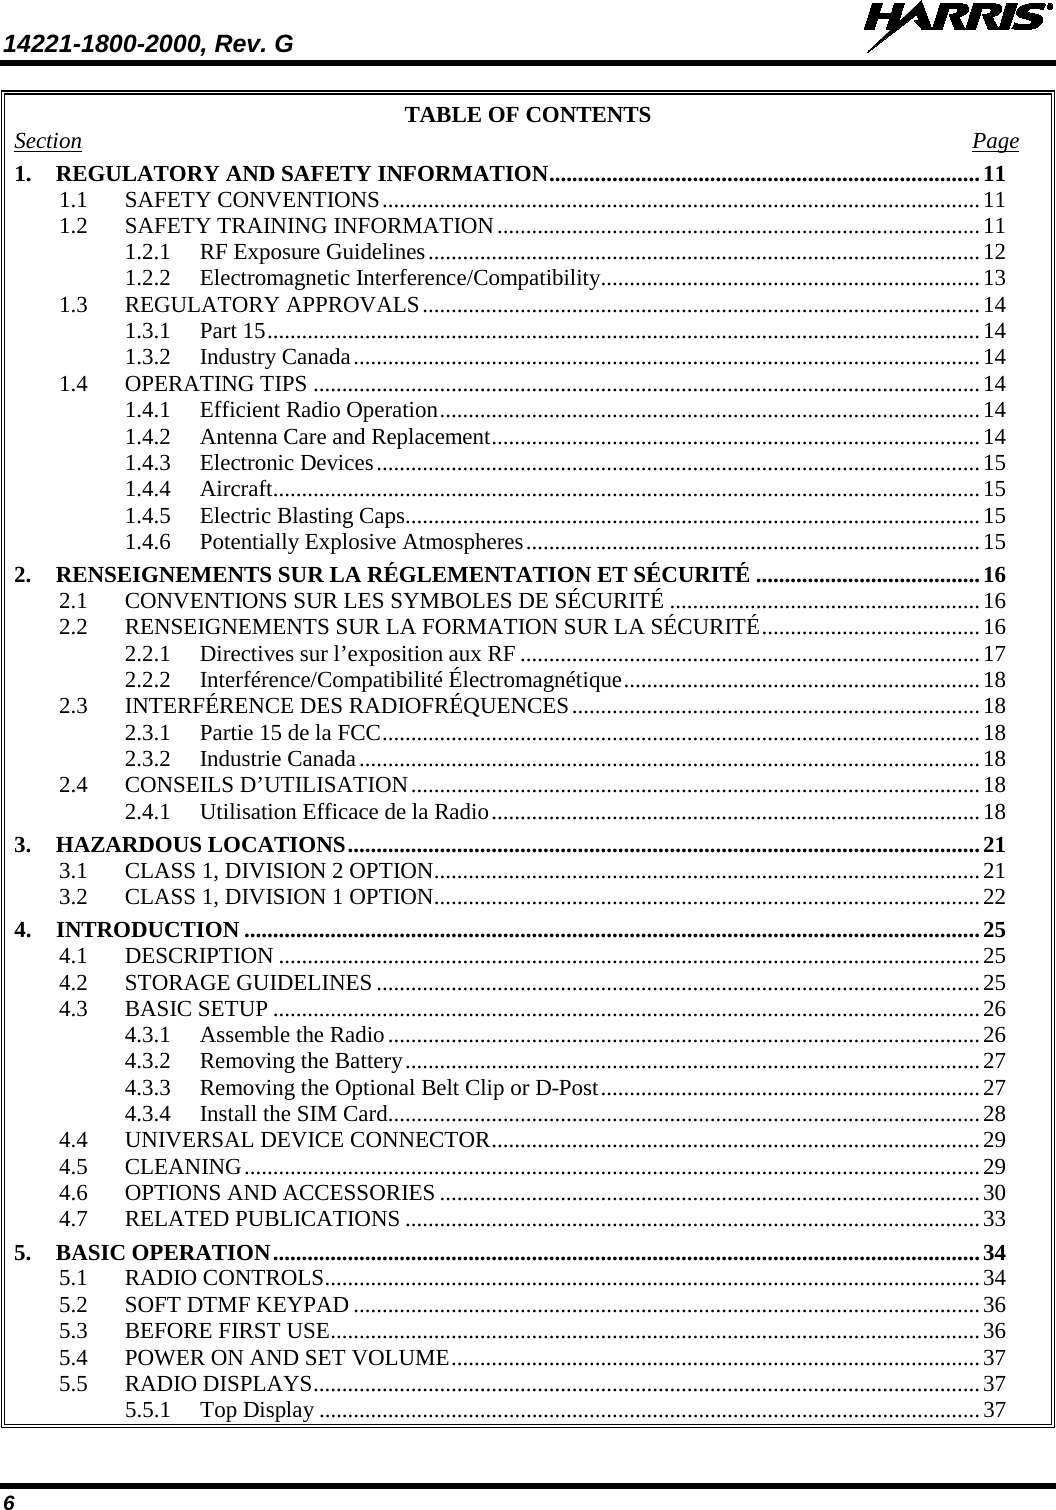 14221-1800-2000, Rev. G   6 TABLE OF CONTENTS Section  Page 1. REGULATORY AND SAFETY INFORMATION ........................................................................... 11 1.1 SAFETY CONVENTIONS ........................................................................................................ 11 1.2 SAFETY TRAINING INFORMATION .................................................................................... 11 1.2.1 RF Exposure Guidelines ................................................................................................ 12 1.2.2 Electromagnetic Interference/Compatibility .................................................................. 13 1.3 REGULATORY APPROVALS ................................................................................................. 14 1.3.1 Part 15 ............................................................................................................................ 14 1.3.2 Industry Canada ............................................................................................................. 14 1.4 OPERATING TIPS .................................................................................................................... 14 1.4.1 Efficient Radio Operation .............................................................................................. 14 1.4.2 Antenna Care and Replacement ..................................................................................... 14 1.4.3 Electronic Devices ......................................................................................................... 15 1.4.4 Aircraft ........................................................................................................................... 15 1.4.5 Electric Blasting Caps .................................................................................................... 15 1.4.6 Potentially Explosive Atmospheres ............................................................................... 15 2. RENSEIGNEMENTS SUR LA RÉGLEMENTATION ET SÉCURITÉ ....................................... 16 2.1 CONVENTIONS SUR LES SYMBOLES DE SÉCURITÉ ...................................................... 16 2.2 RENSEIGNEMENTS SUR LA FORMATION SUR LA SÉCURITÉ ...................................... 16 2.2.1 Directives sur l’exposition aux RF ................................................................................ 17 2.2.2 Interférence/Compatibilité Électromagnétique .............................................................. 18 2.3 INTERFÉRENCE DES RADIOFRÉQUENCES ....................................................................... 18 2.3.1 Partie 15 de la FCC ........................................................................................................ 18 2.3.2 Industrie Canada ............................................................................................................ 18 2.4 CONSEILS D’UTILISATION ................................................................................................... 18 2.4.1 Utilisation Efficace de la Radio ..................................................................................... 18 3. HAZARDOUS LOCATIONS .............................................................................................................. 21 3.1 CLASS 1, DIVISION 2 OPTION ............................................................................................... 21 3.2 CLASS 1, DIVISION 1 OPTION ............................................................................................... 22 4. INTRODUCTION ................................................................................................................................ 25 4.1 DESCRIPTION .......................................................................................................................... 25 4.2 STORAGE GUIDELINES ......................................................................................................... 25 4.3 BASIC SETUP ........................................................................................................................... 26 4.3.1 Assemble the Radio ....................................................................................................... 26 4.3.2 Removing the Battery .................................................................................................... 27 4.3.3 Removing the Optional Belt Clip or D-Post .................................................................. 27 4.3.4 Install the SIM Card ....................................................................................................... 28 4.4 UNIVERSAL DEVICE CONNECTOR ..................................................................................... 29 4.5 CLEANING ................................................................................................................................ 29 4.6 OPTIONS AND ACCESSORIES .............................................................................................. 30 4.7 RELATED PUBLICATIONS .................................................................................................... 33 5. BASIC OPERATION ........................................................................................................................... 34 5.1 RADIO CONTROLS .................................................................................................................. 34 5.2 SOFT DTMF KEYPAD ............................................................................................................. 36 5.3 BEFORE FIRST USE ................................................................................................................. 36 5.4 POWER ON AND SET VOLUME ............................................................................................ 37 5.5 RADIO DISPLAYS .................................................................................................................... 37 5.5.1 Top Display ................................................................................................................... 37 